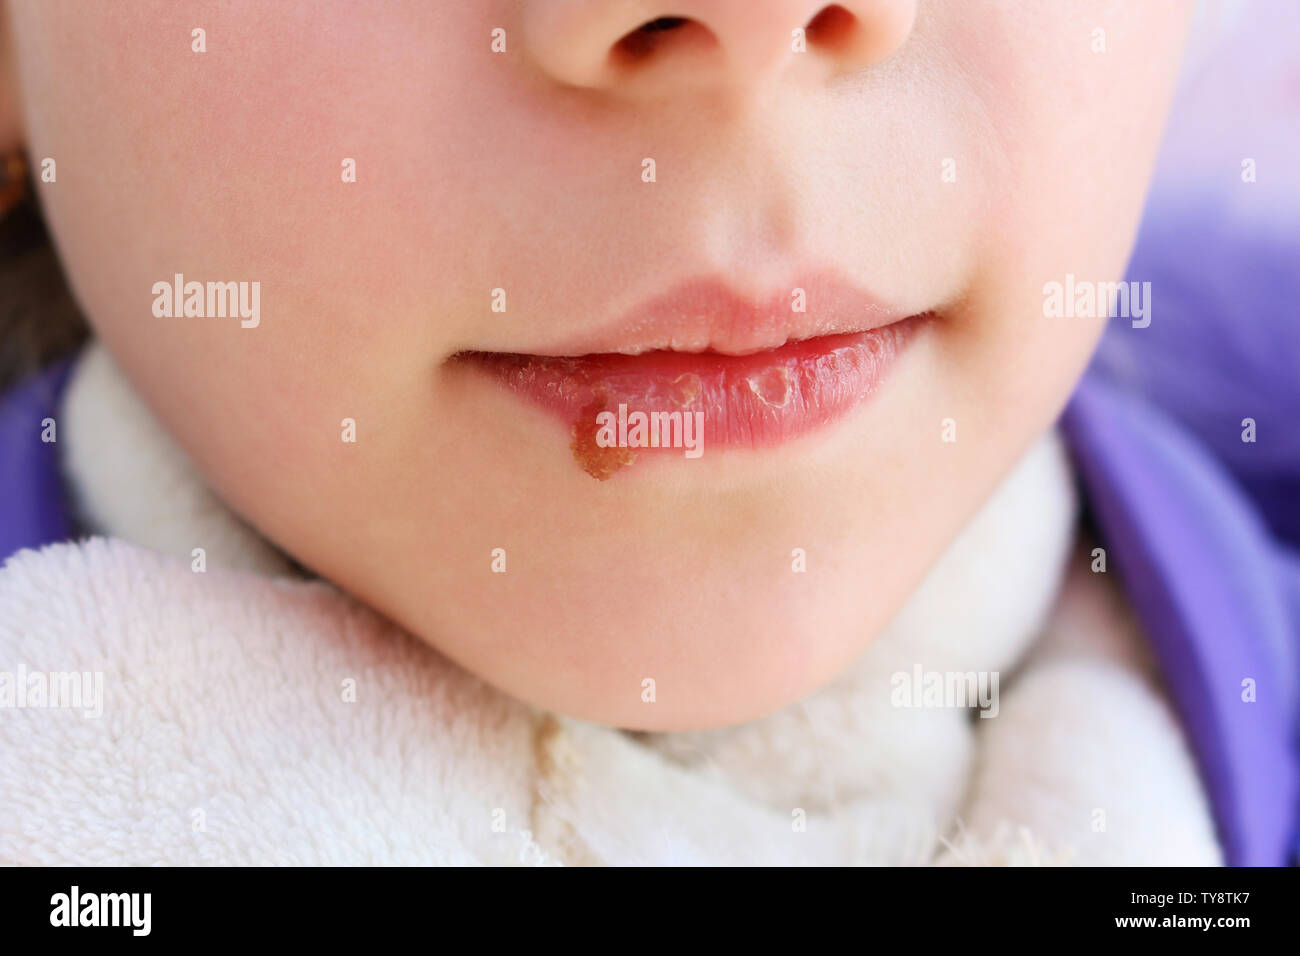 Herpes on lips of child. Treatment ointment. Stock Photo